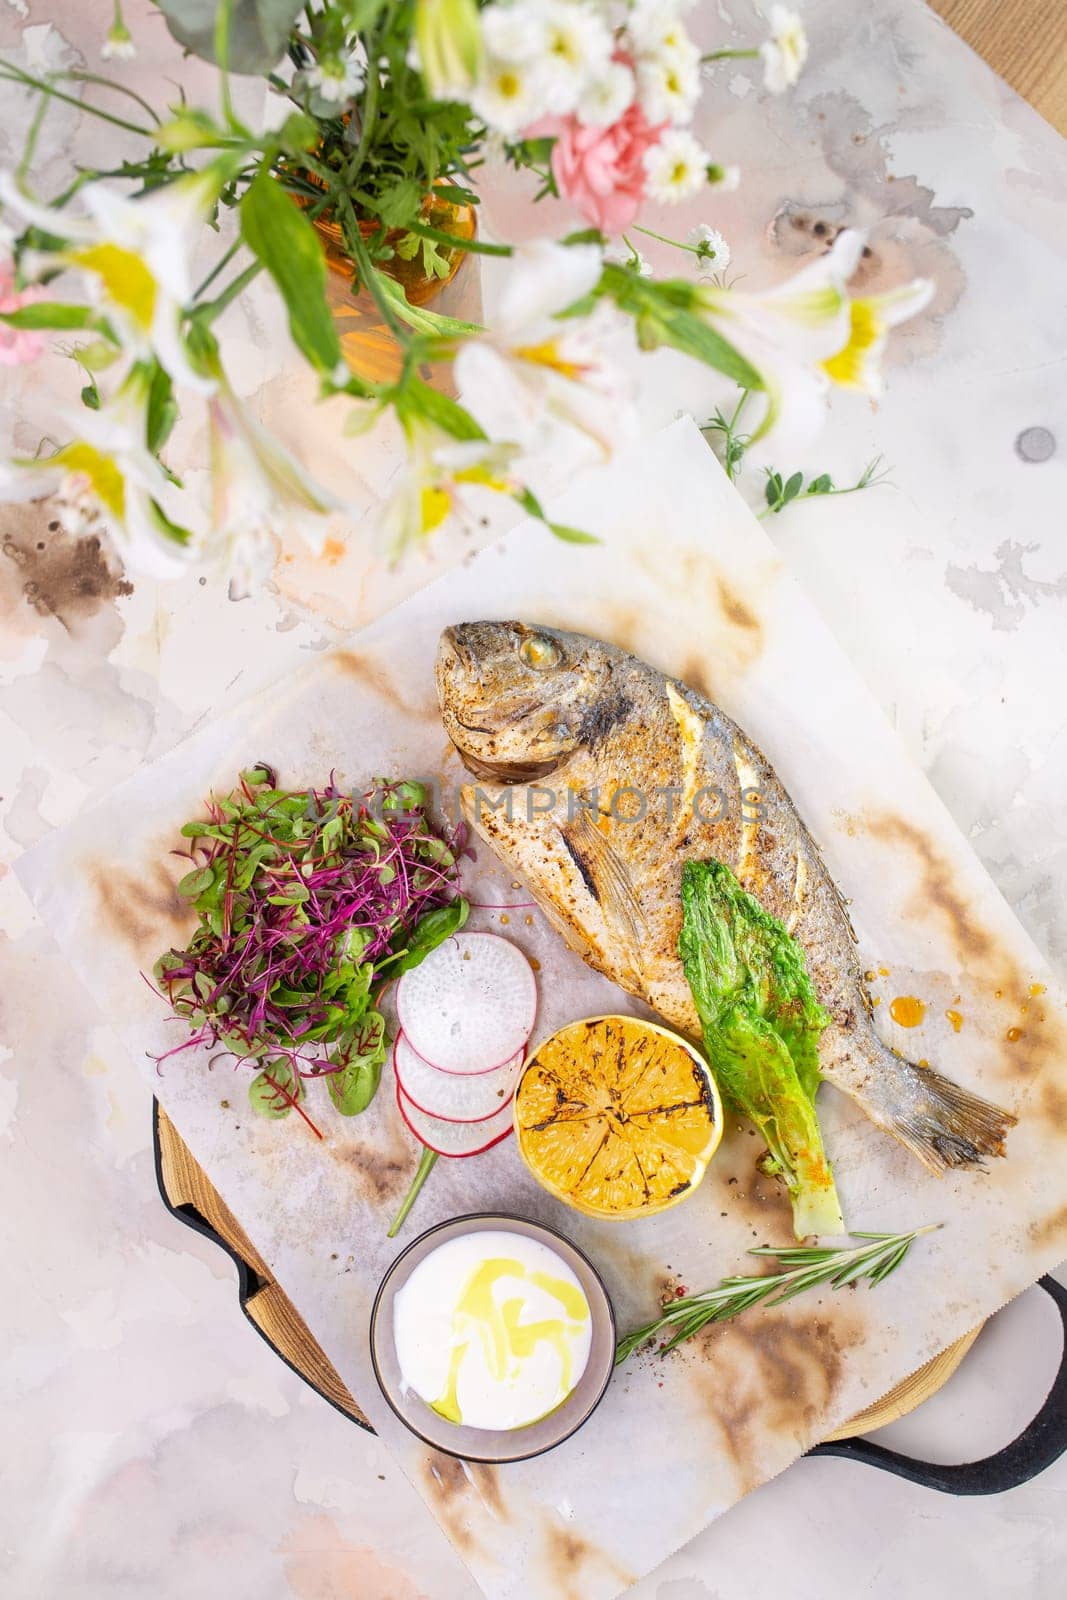 Grilled fish with lemon and herbs on a white background by Pukhovskiy